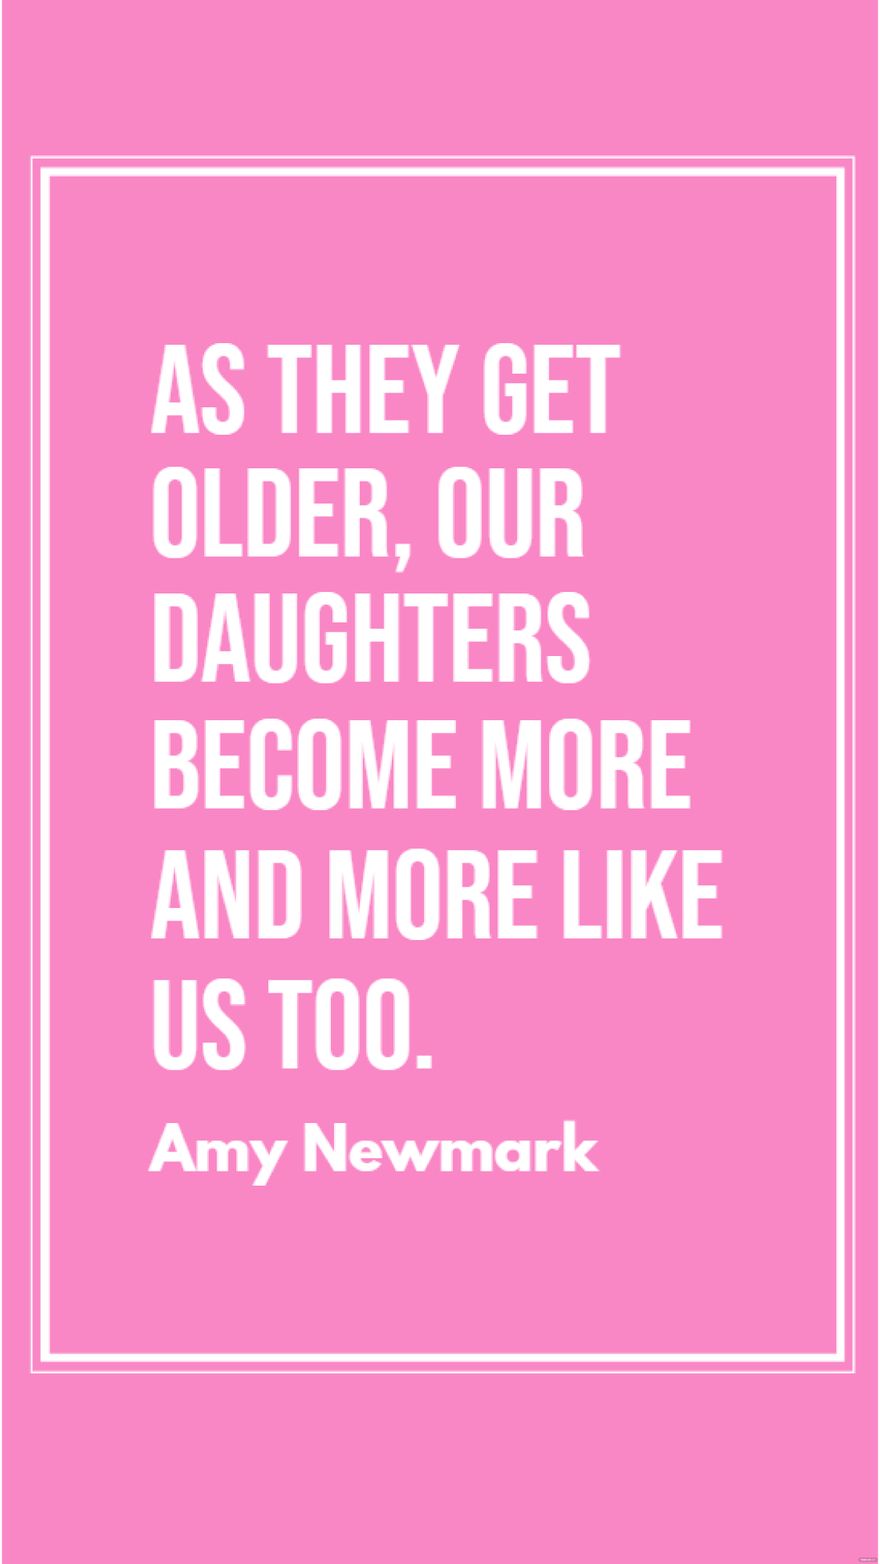 Amy Newmark - As they get older, our daughters become more and more like us too.